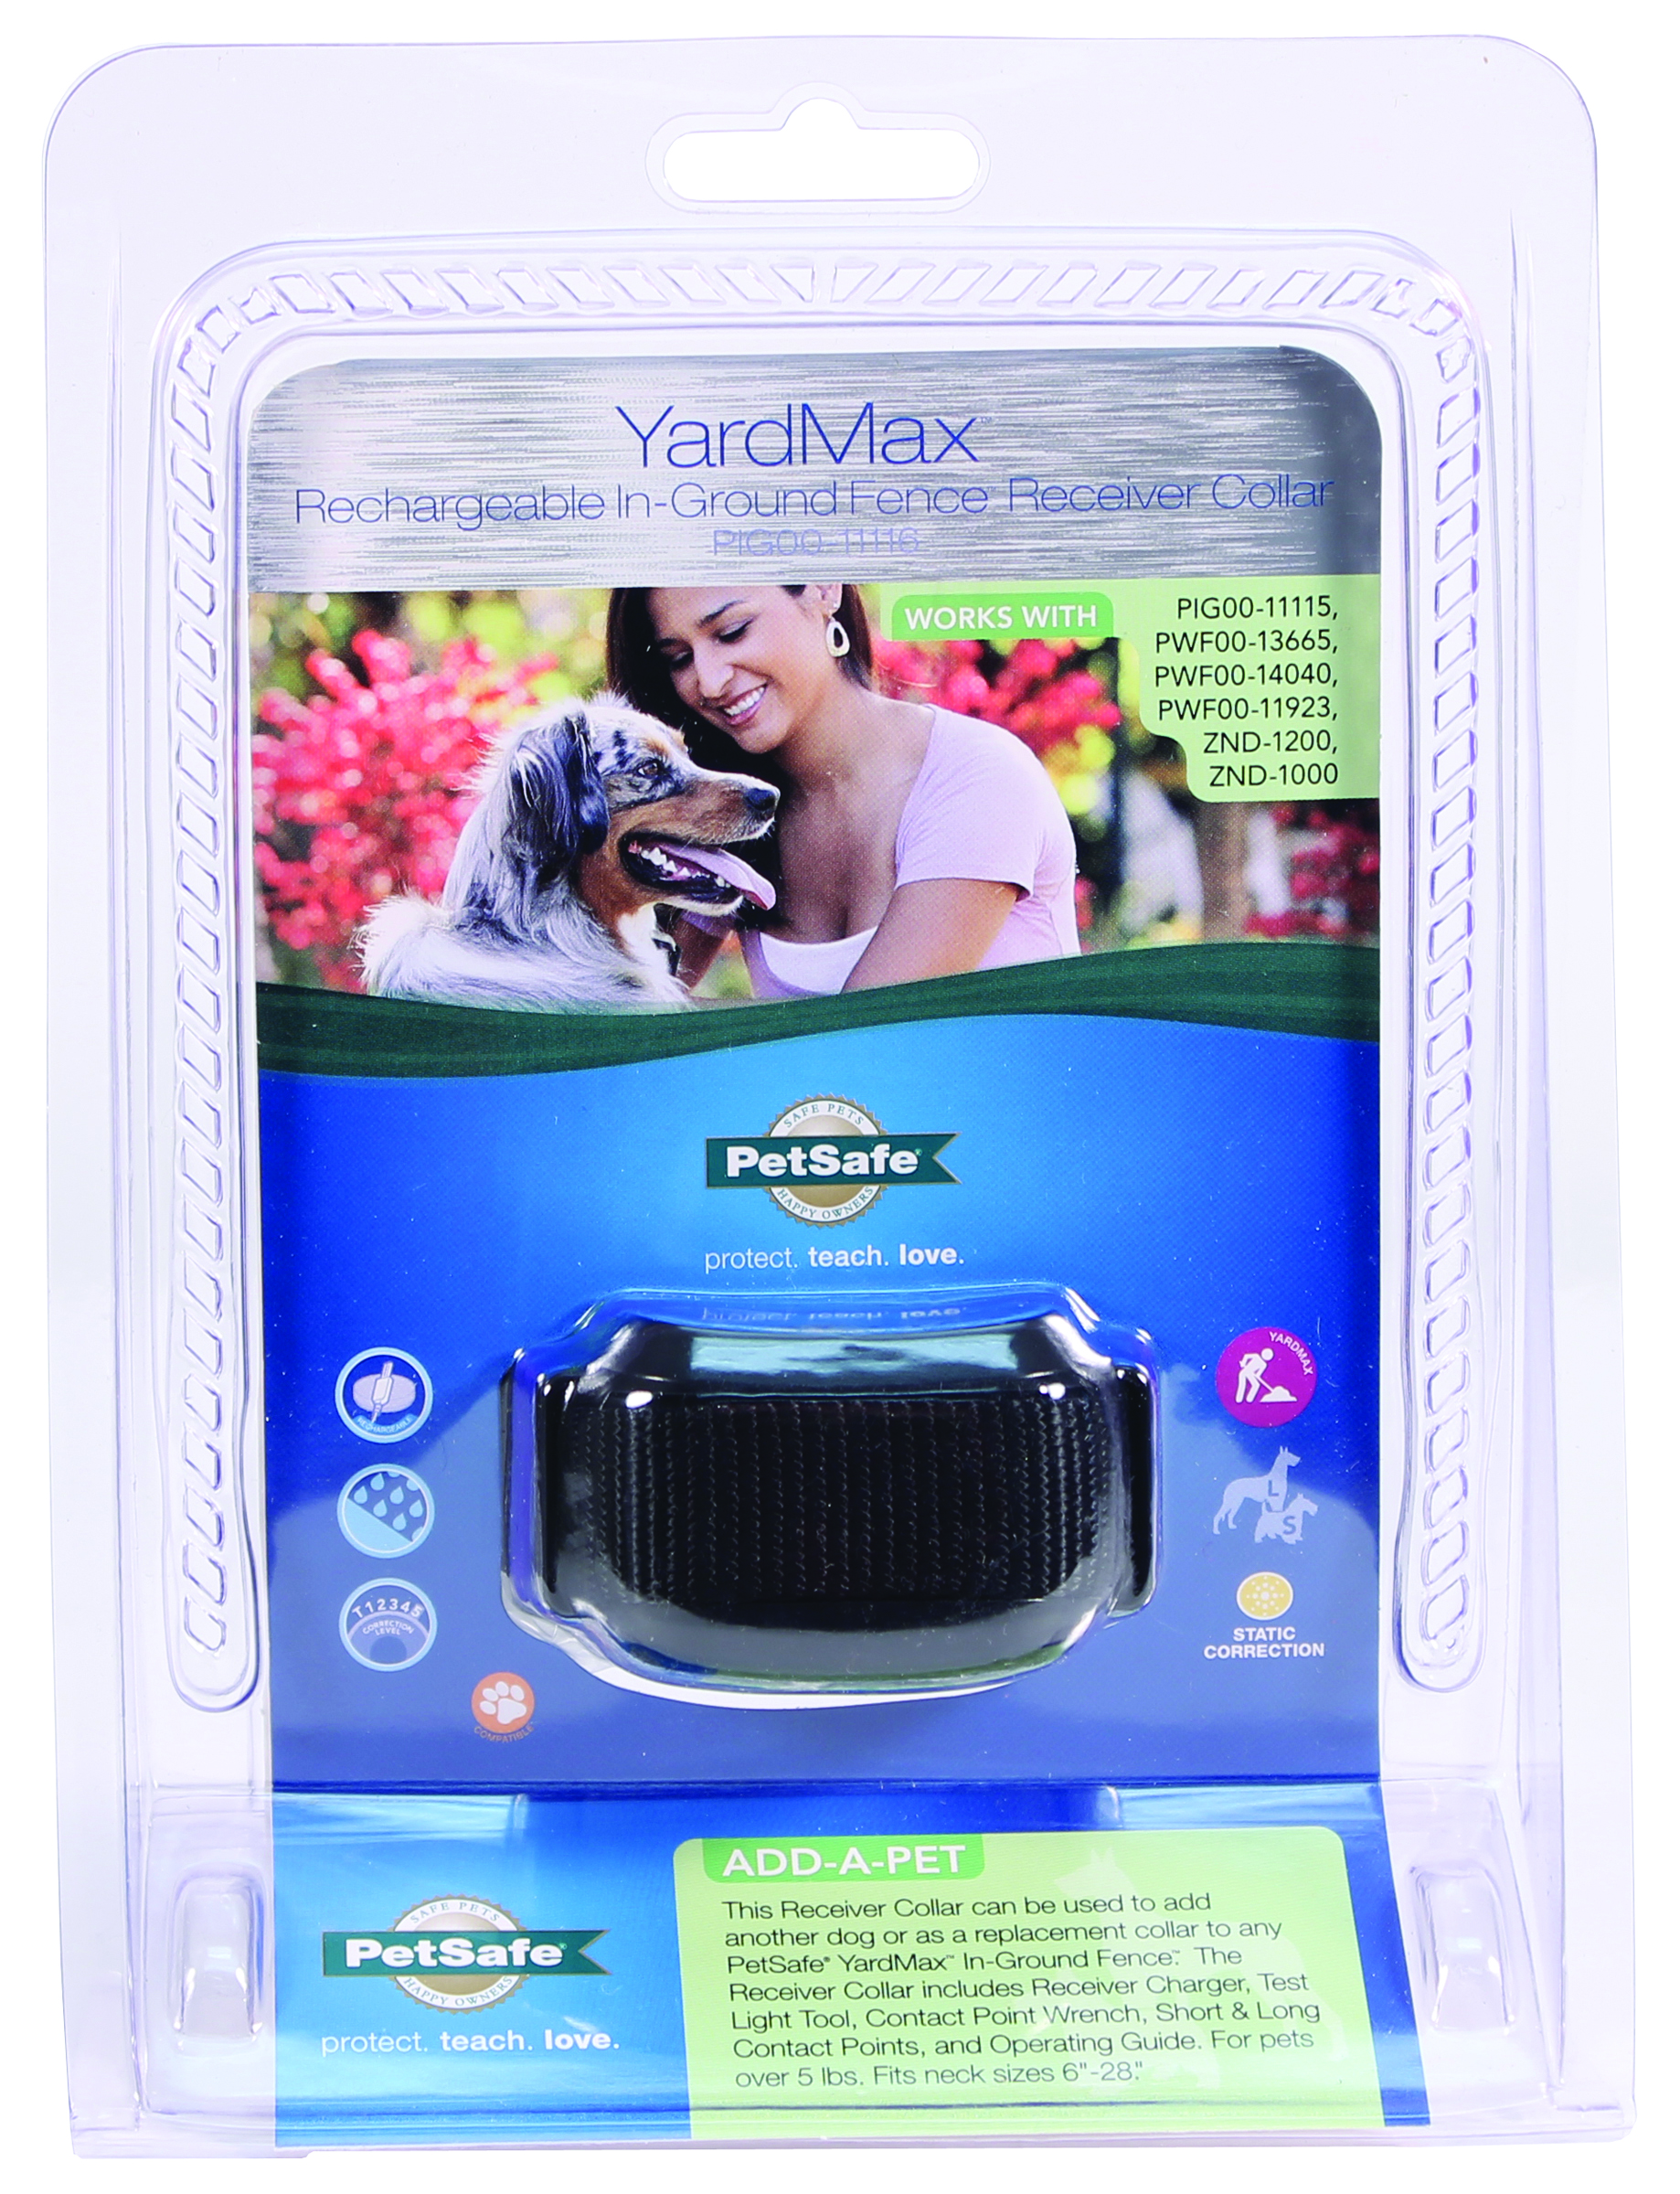 YARDMAX RECHARGEABLE IN-GROUND FENCE RECEIVER CLR